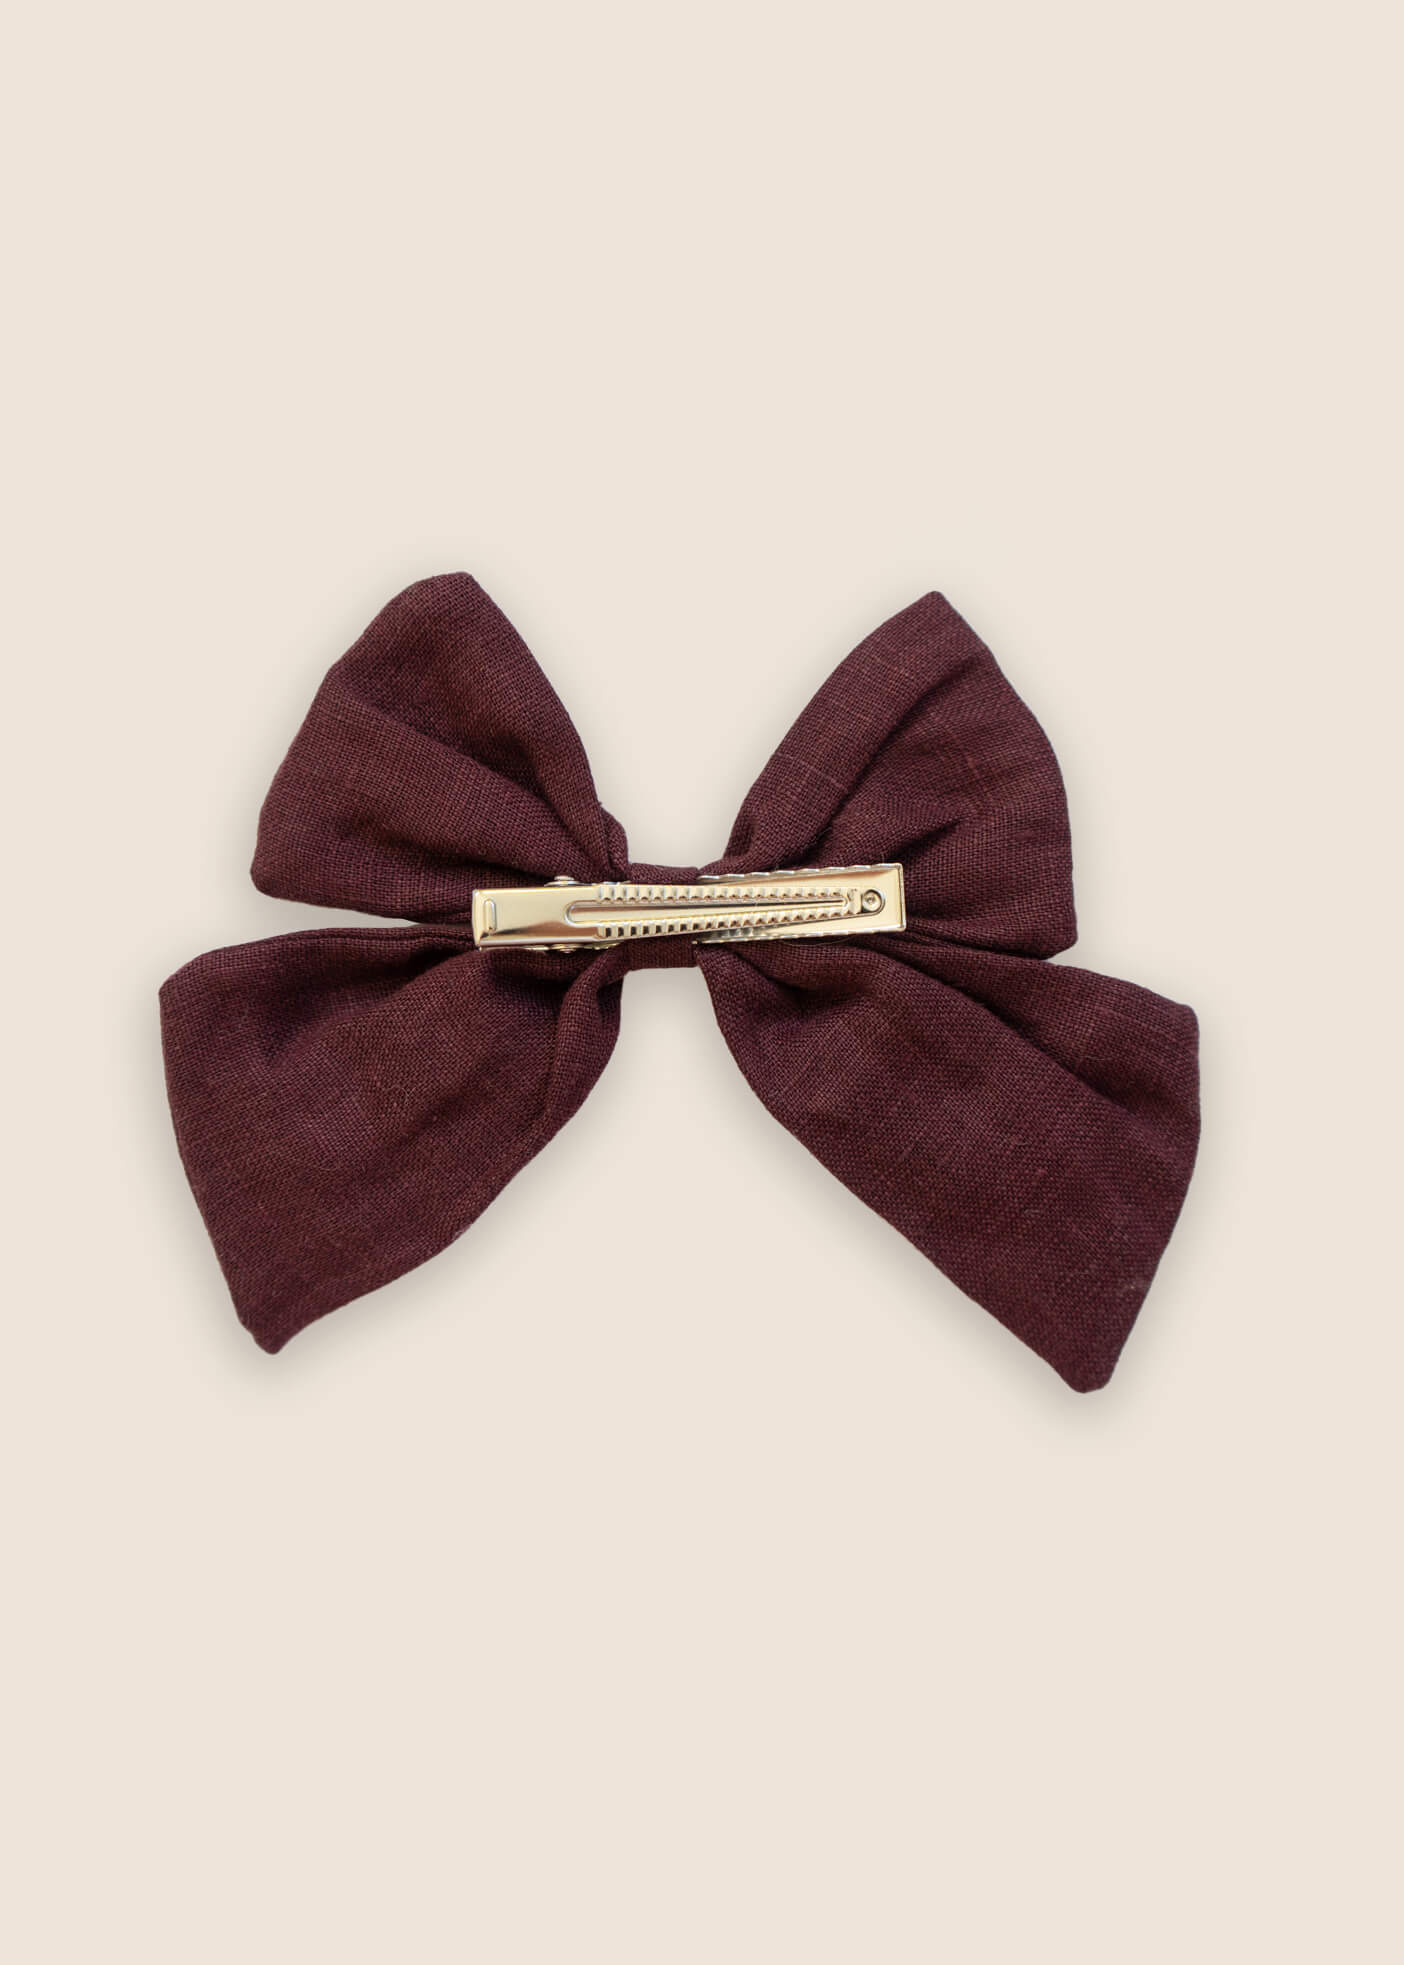 BELLE Bow Hair Clip - Red Wine - Rocco & The Fox